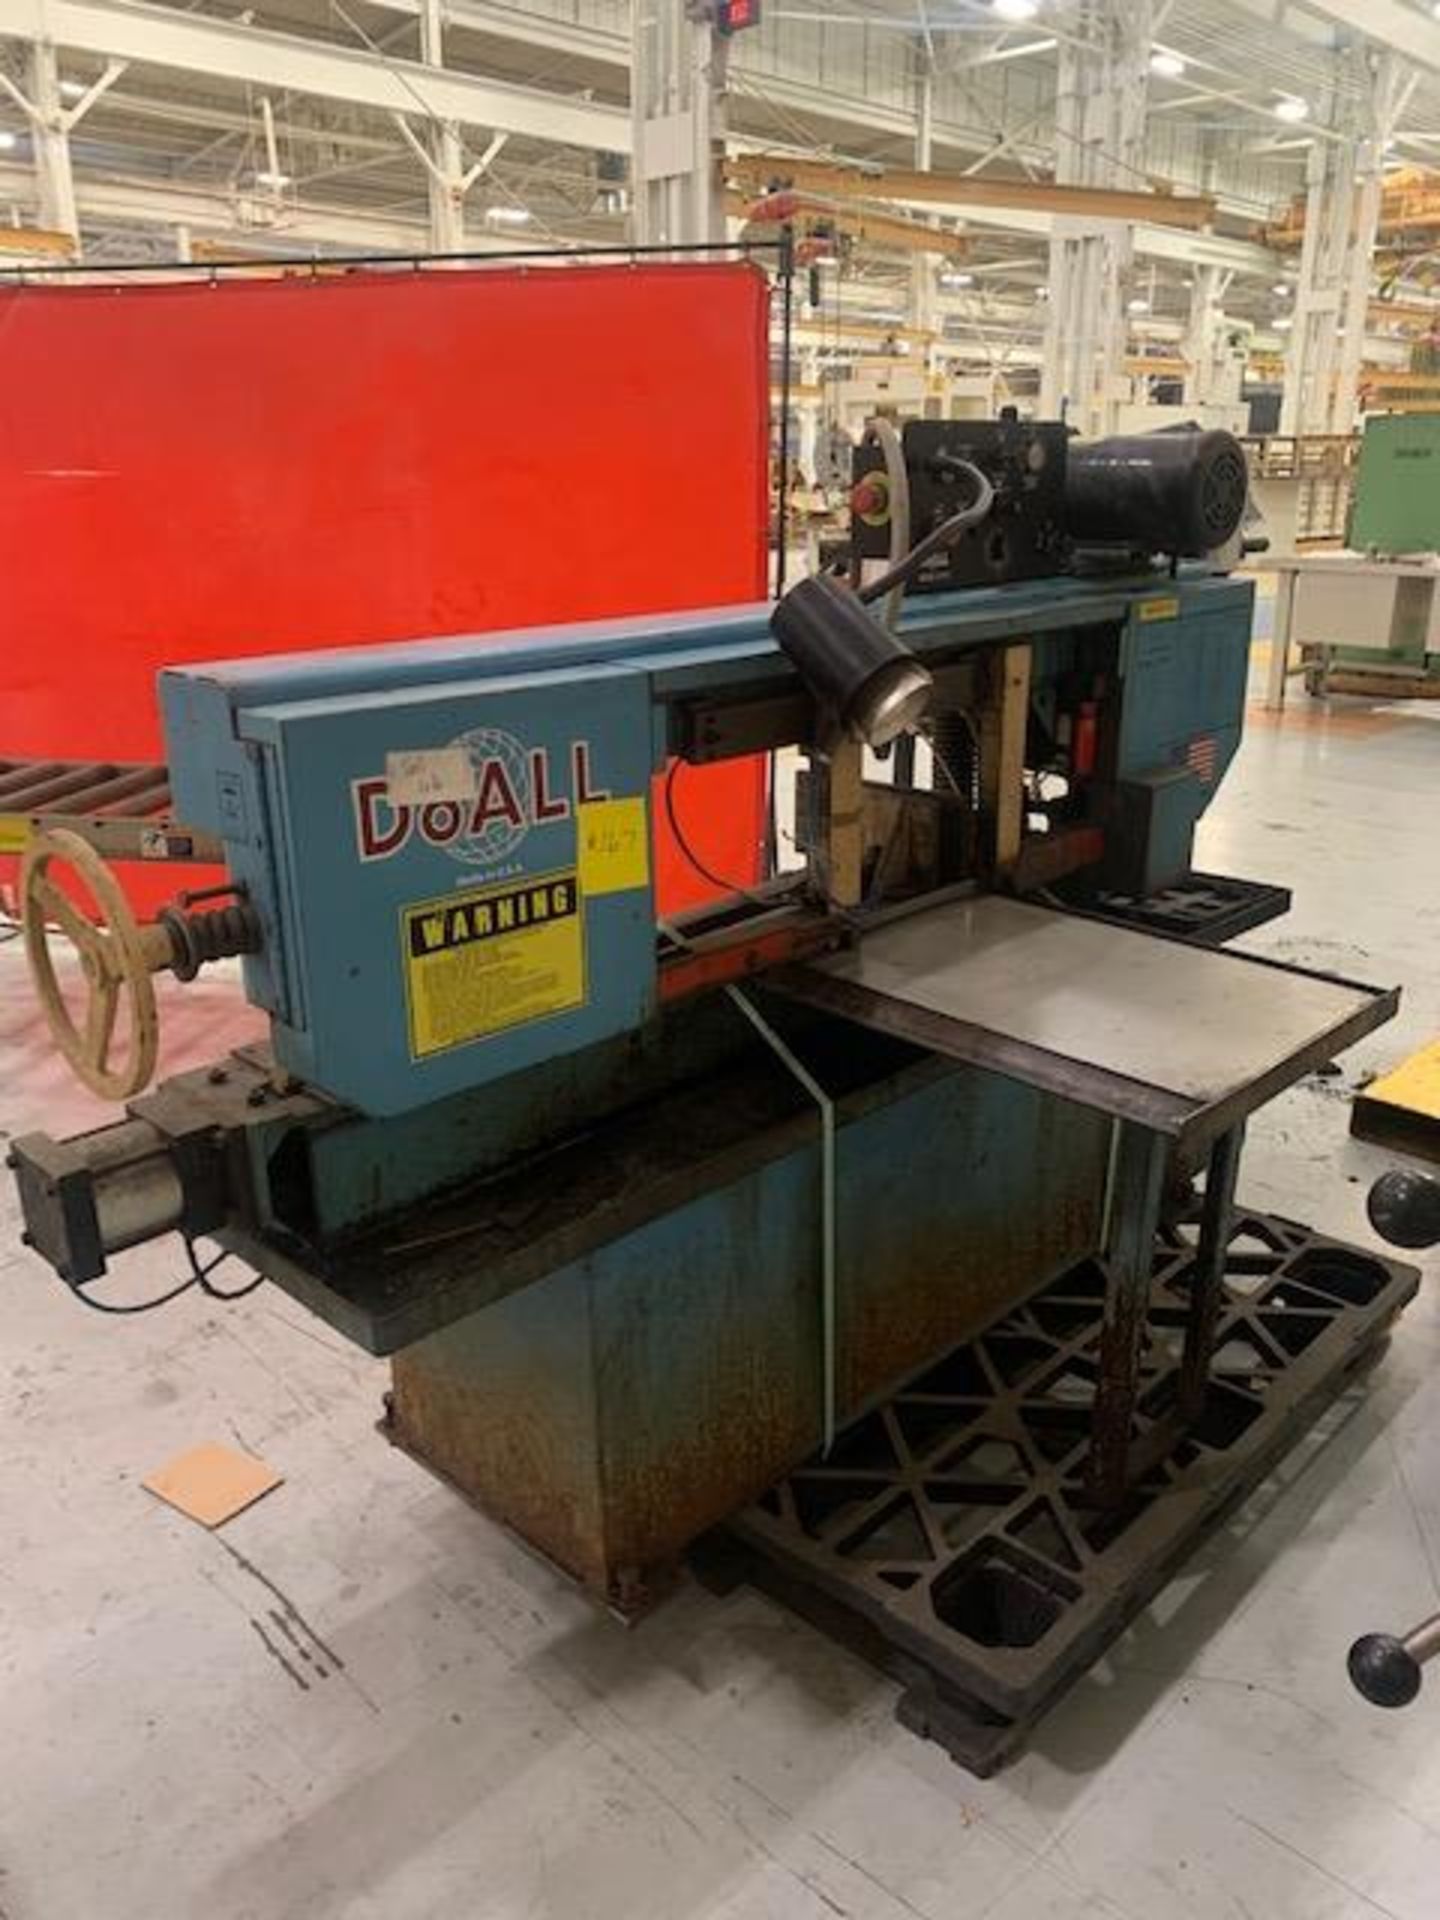 DoAll Mod# C916-M Horizontal Bandsaw w/ 5ft Roller Table, 2 HP